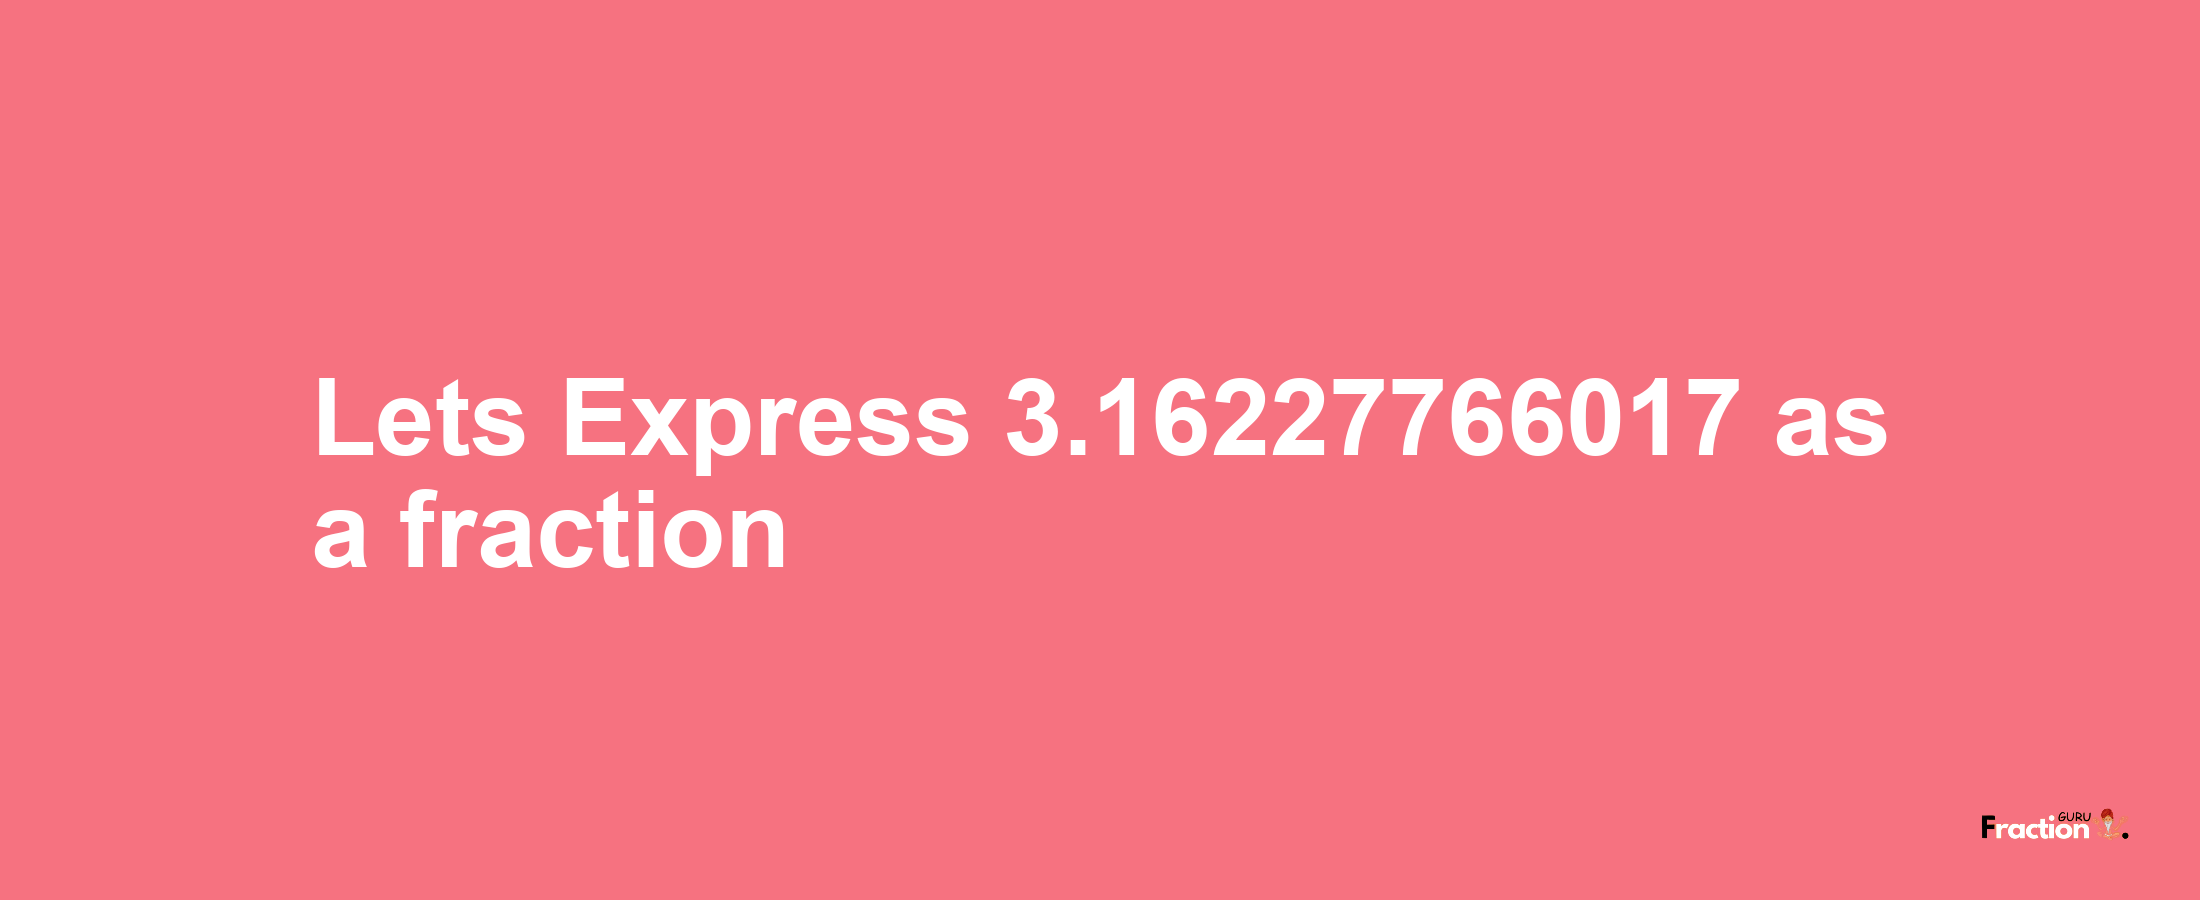 Lets Express 3.16227766017 as afraction